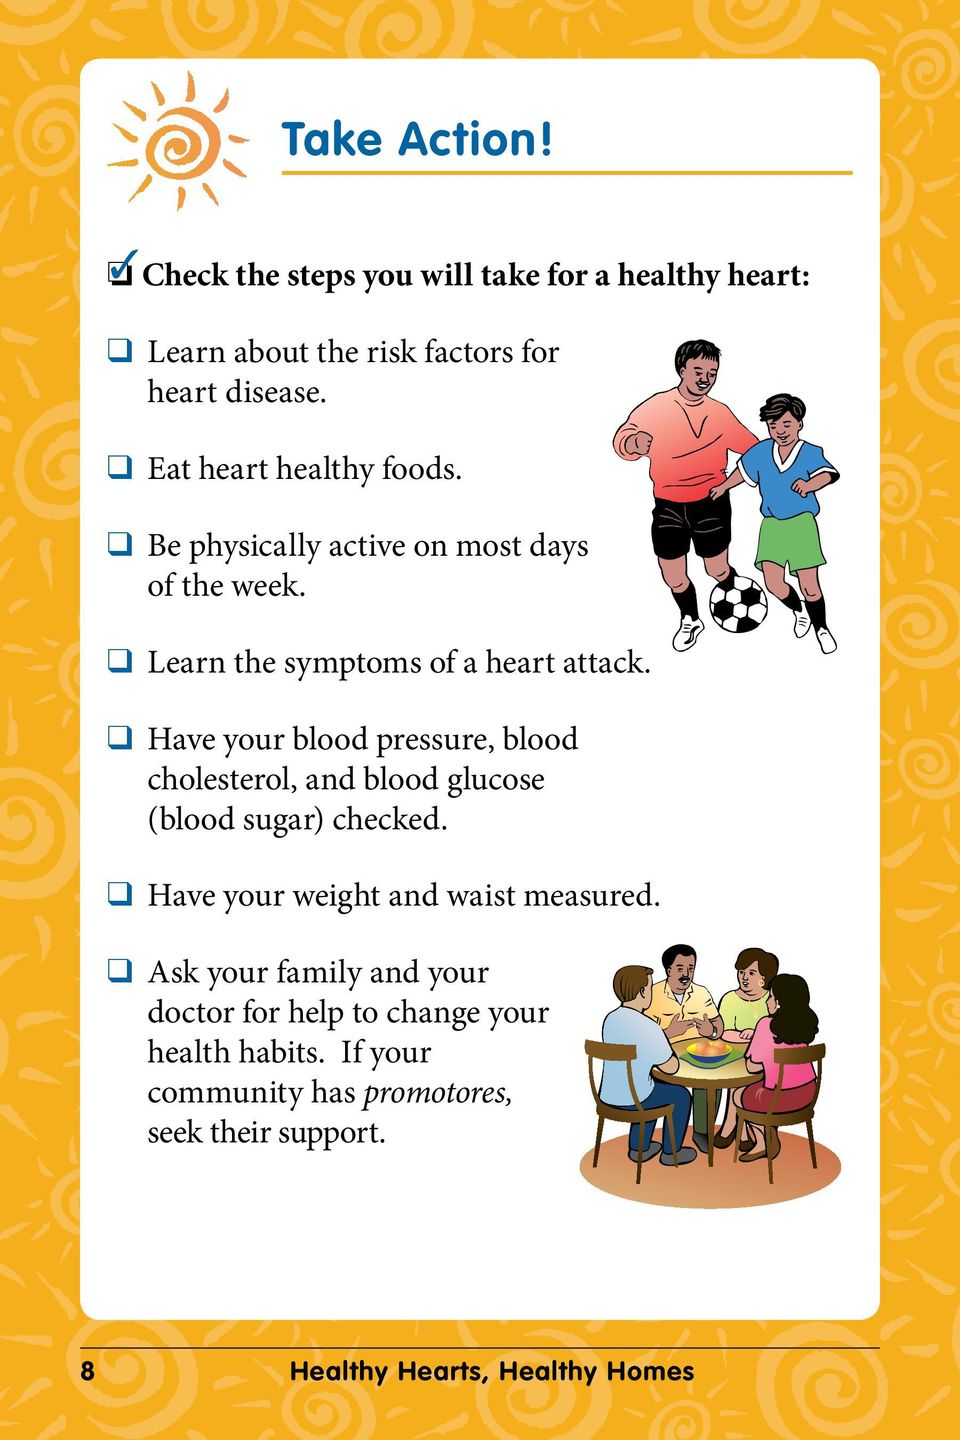 Have your blood pressure, blood cholesterol, and blood glucose (blood sugar) checked. Have your weight and waist measured.